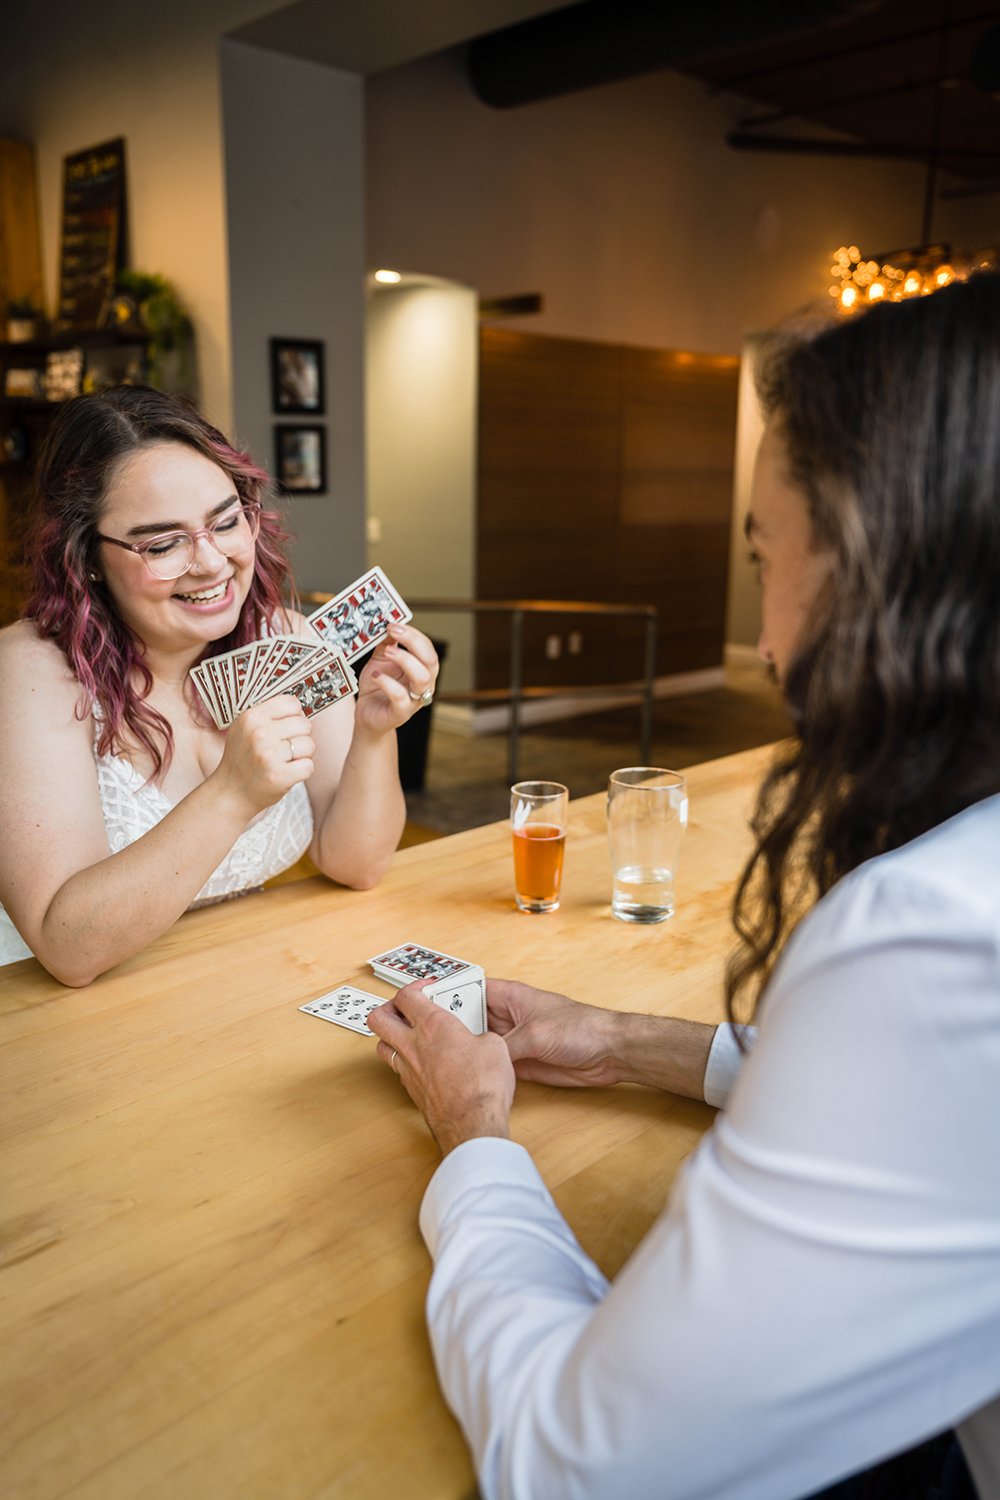 A bride looks at her hand of cards and smiles as she goes to play a card from her hand.